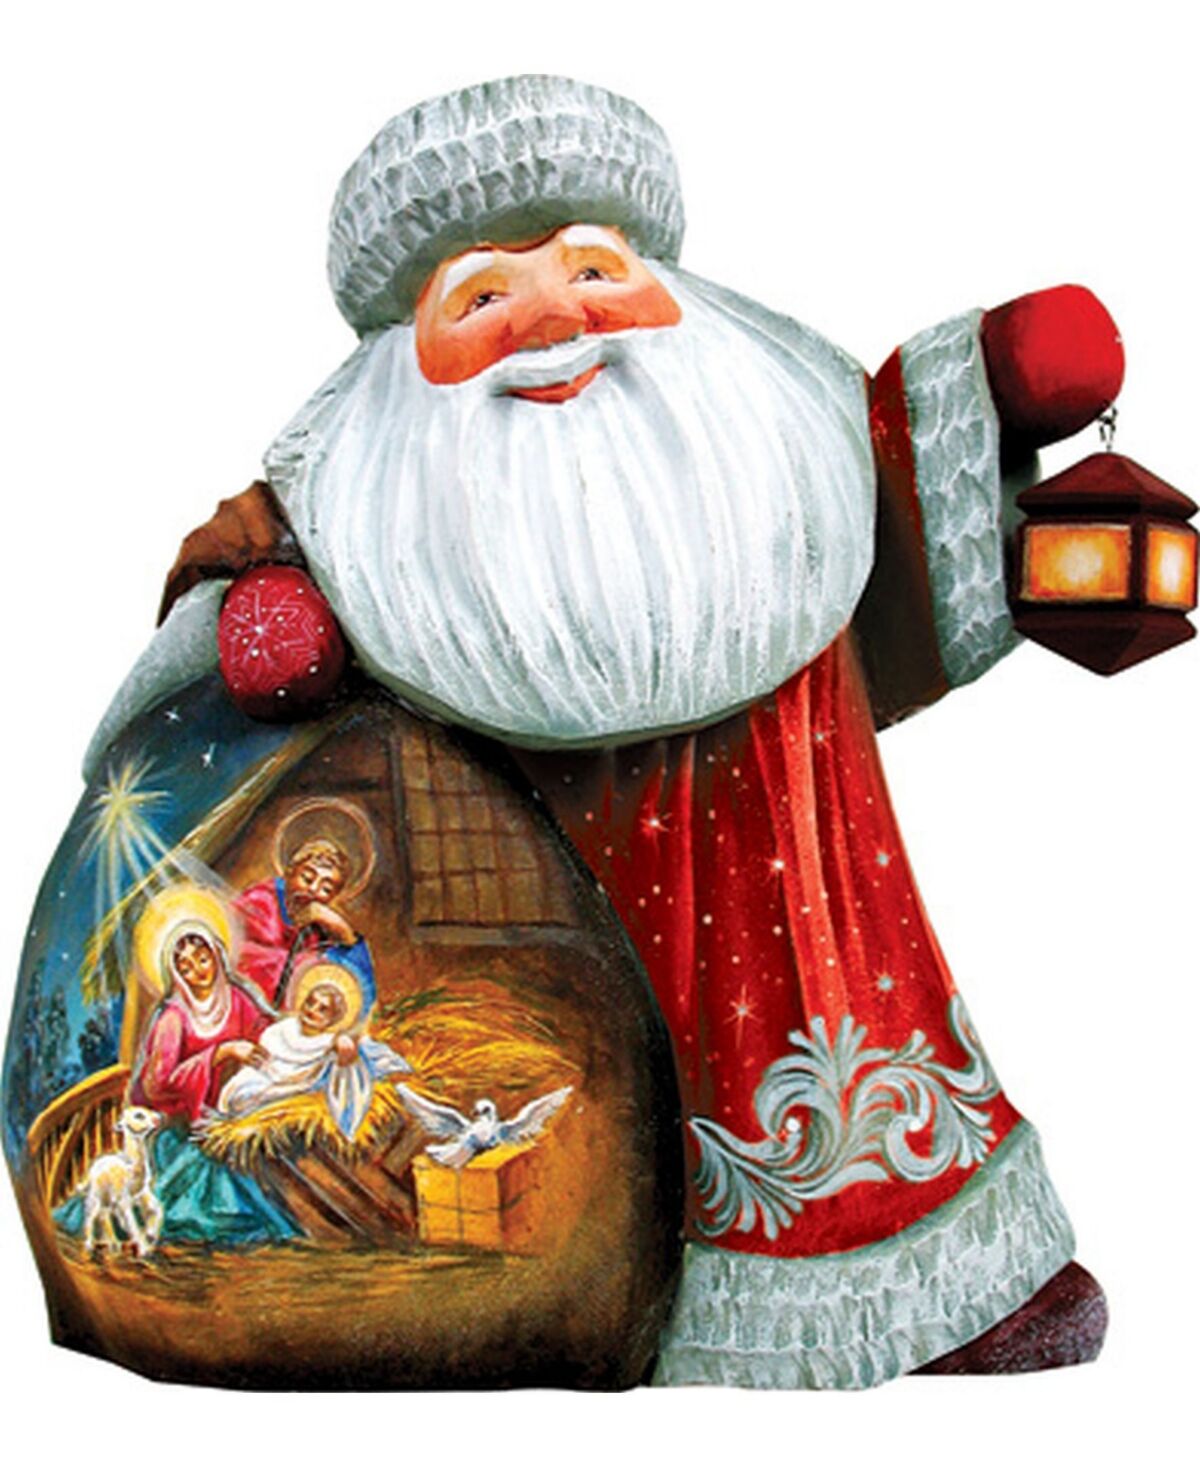 G.DeBrekht Woodcarved and Hand Painted Santa First Night Figurine - Multi